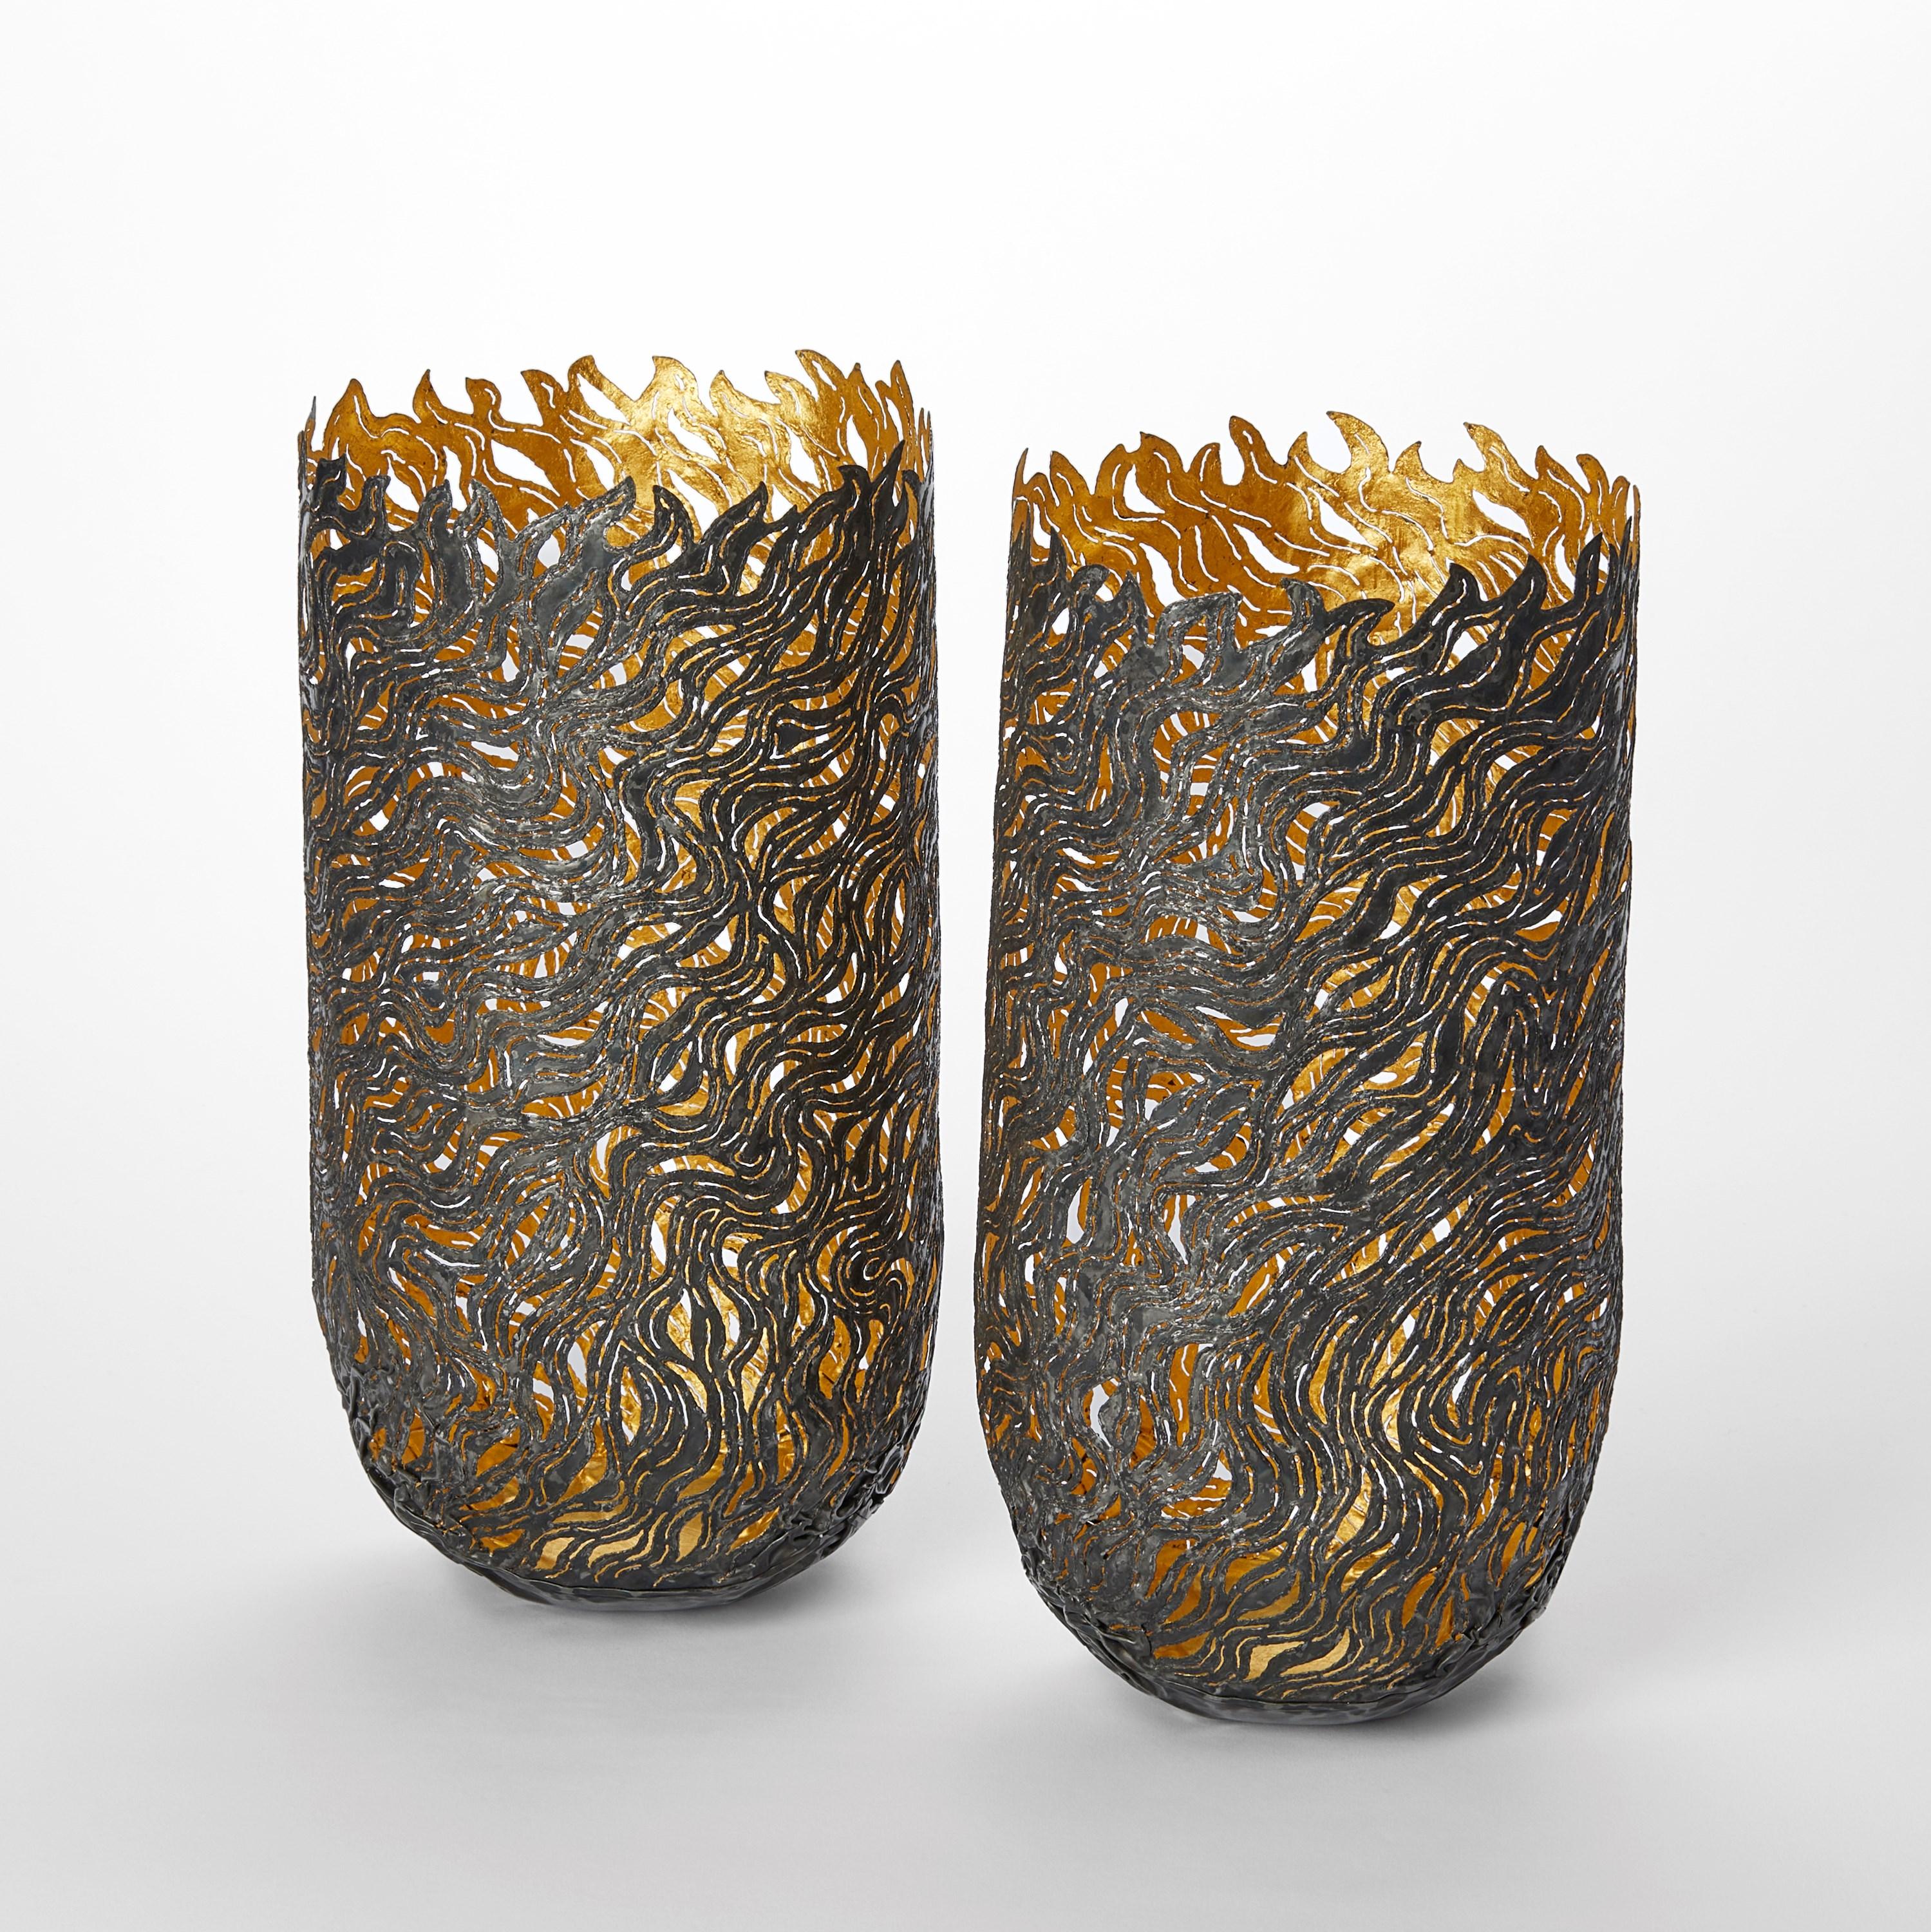 Organic Modern  Autumn Dance Vessels, organic textured steel & gold vessels by Claire Malet For Sale